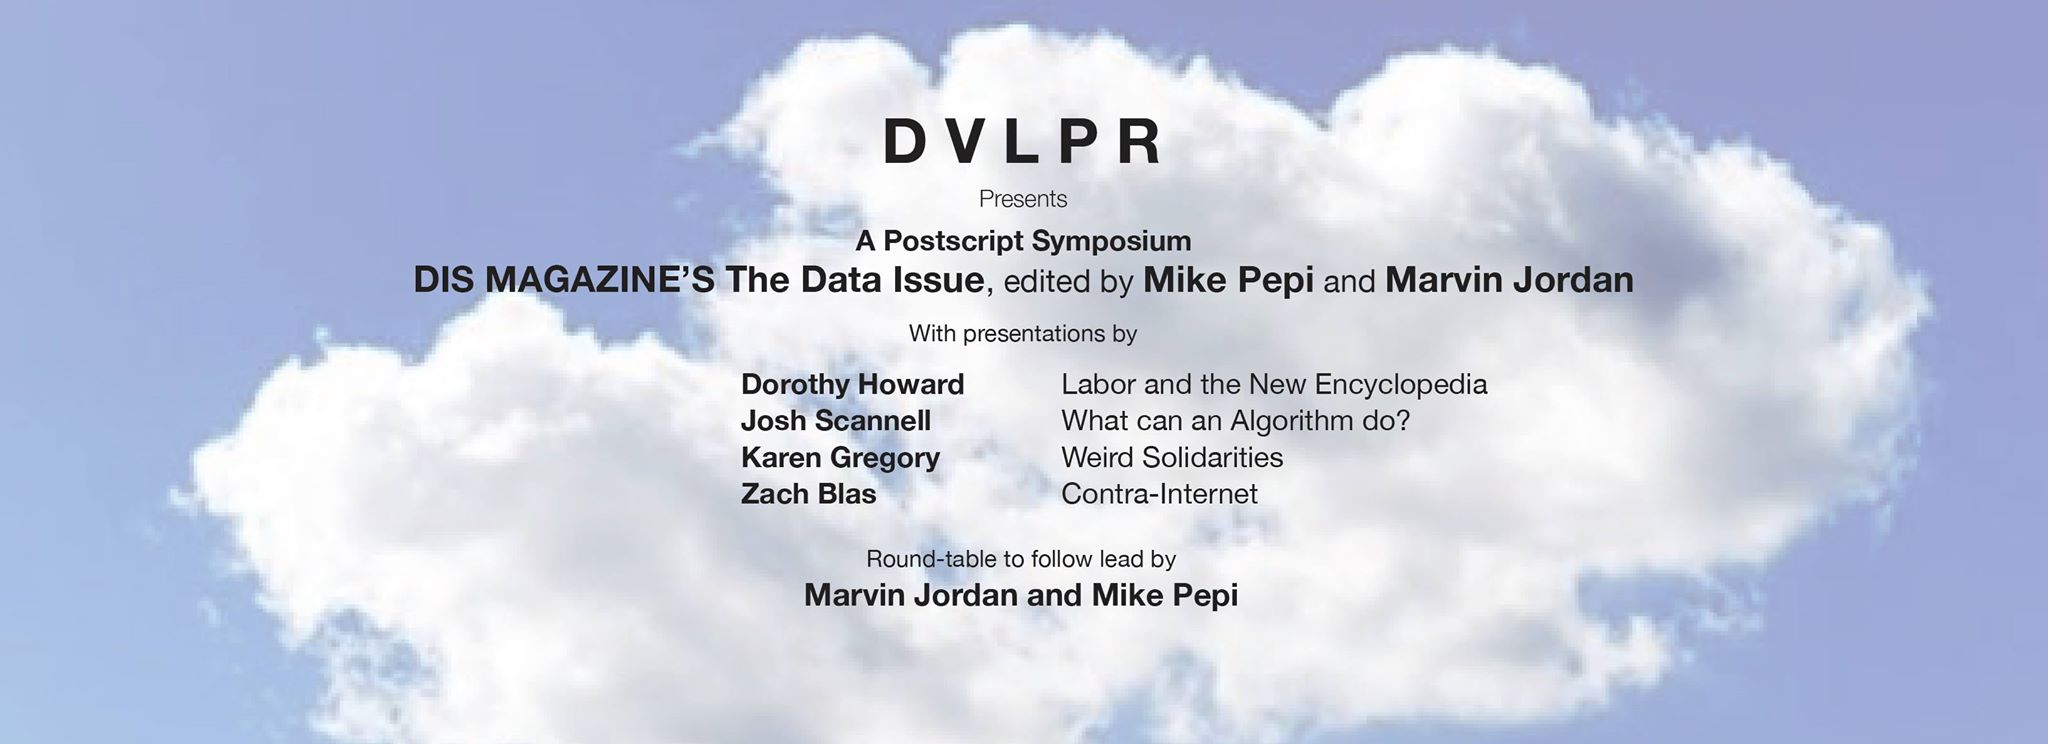 DVLPR and DIS Magazine: A Postscript on The Data Issue